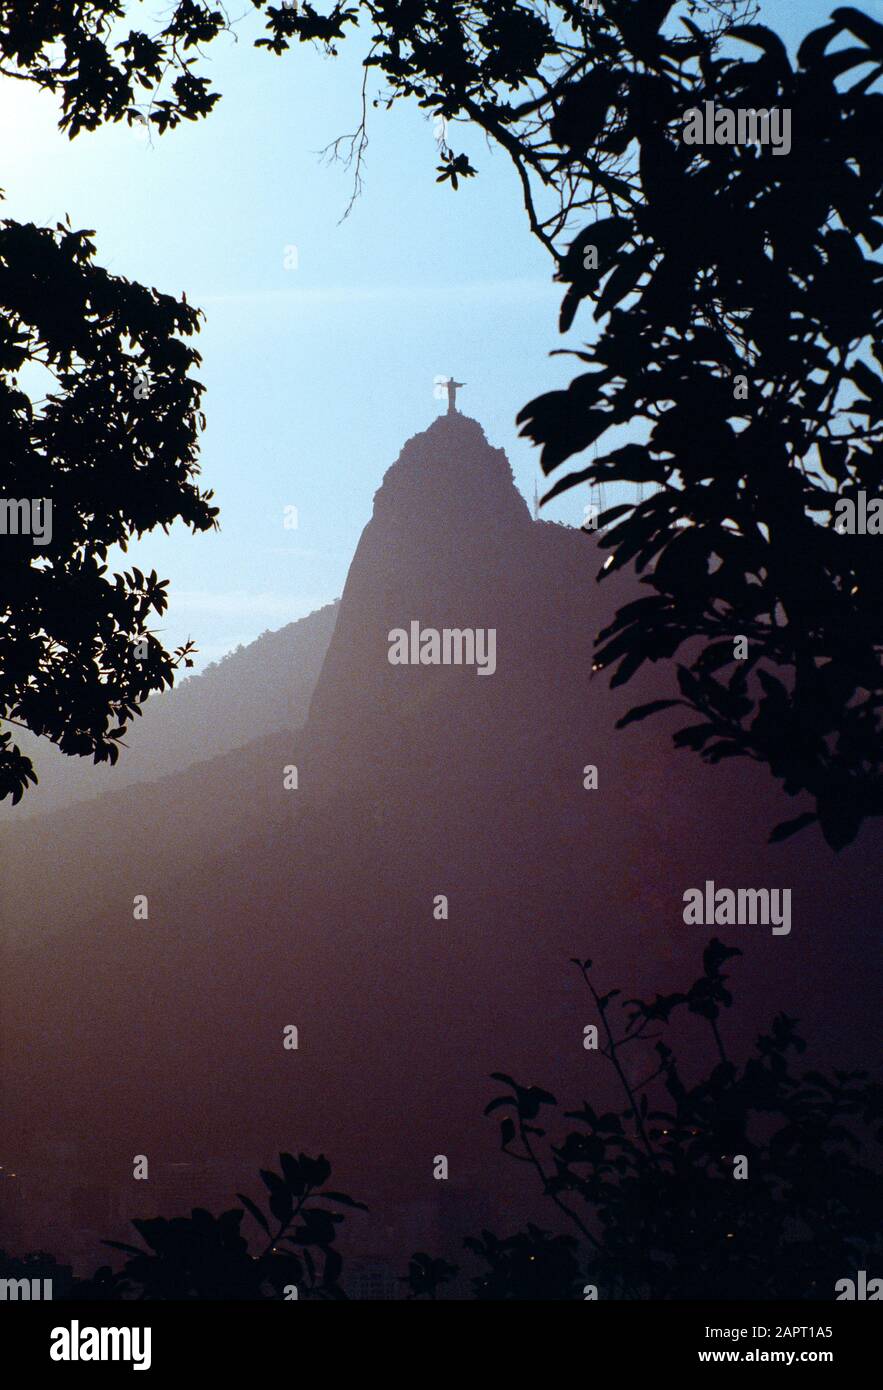 Brazil. Rio de Janeiro. Late evening view of Corcovado mountain framed with tree branches in silhouette. Stock Photo